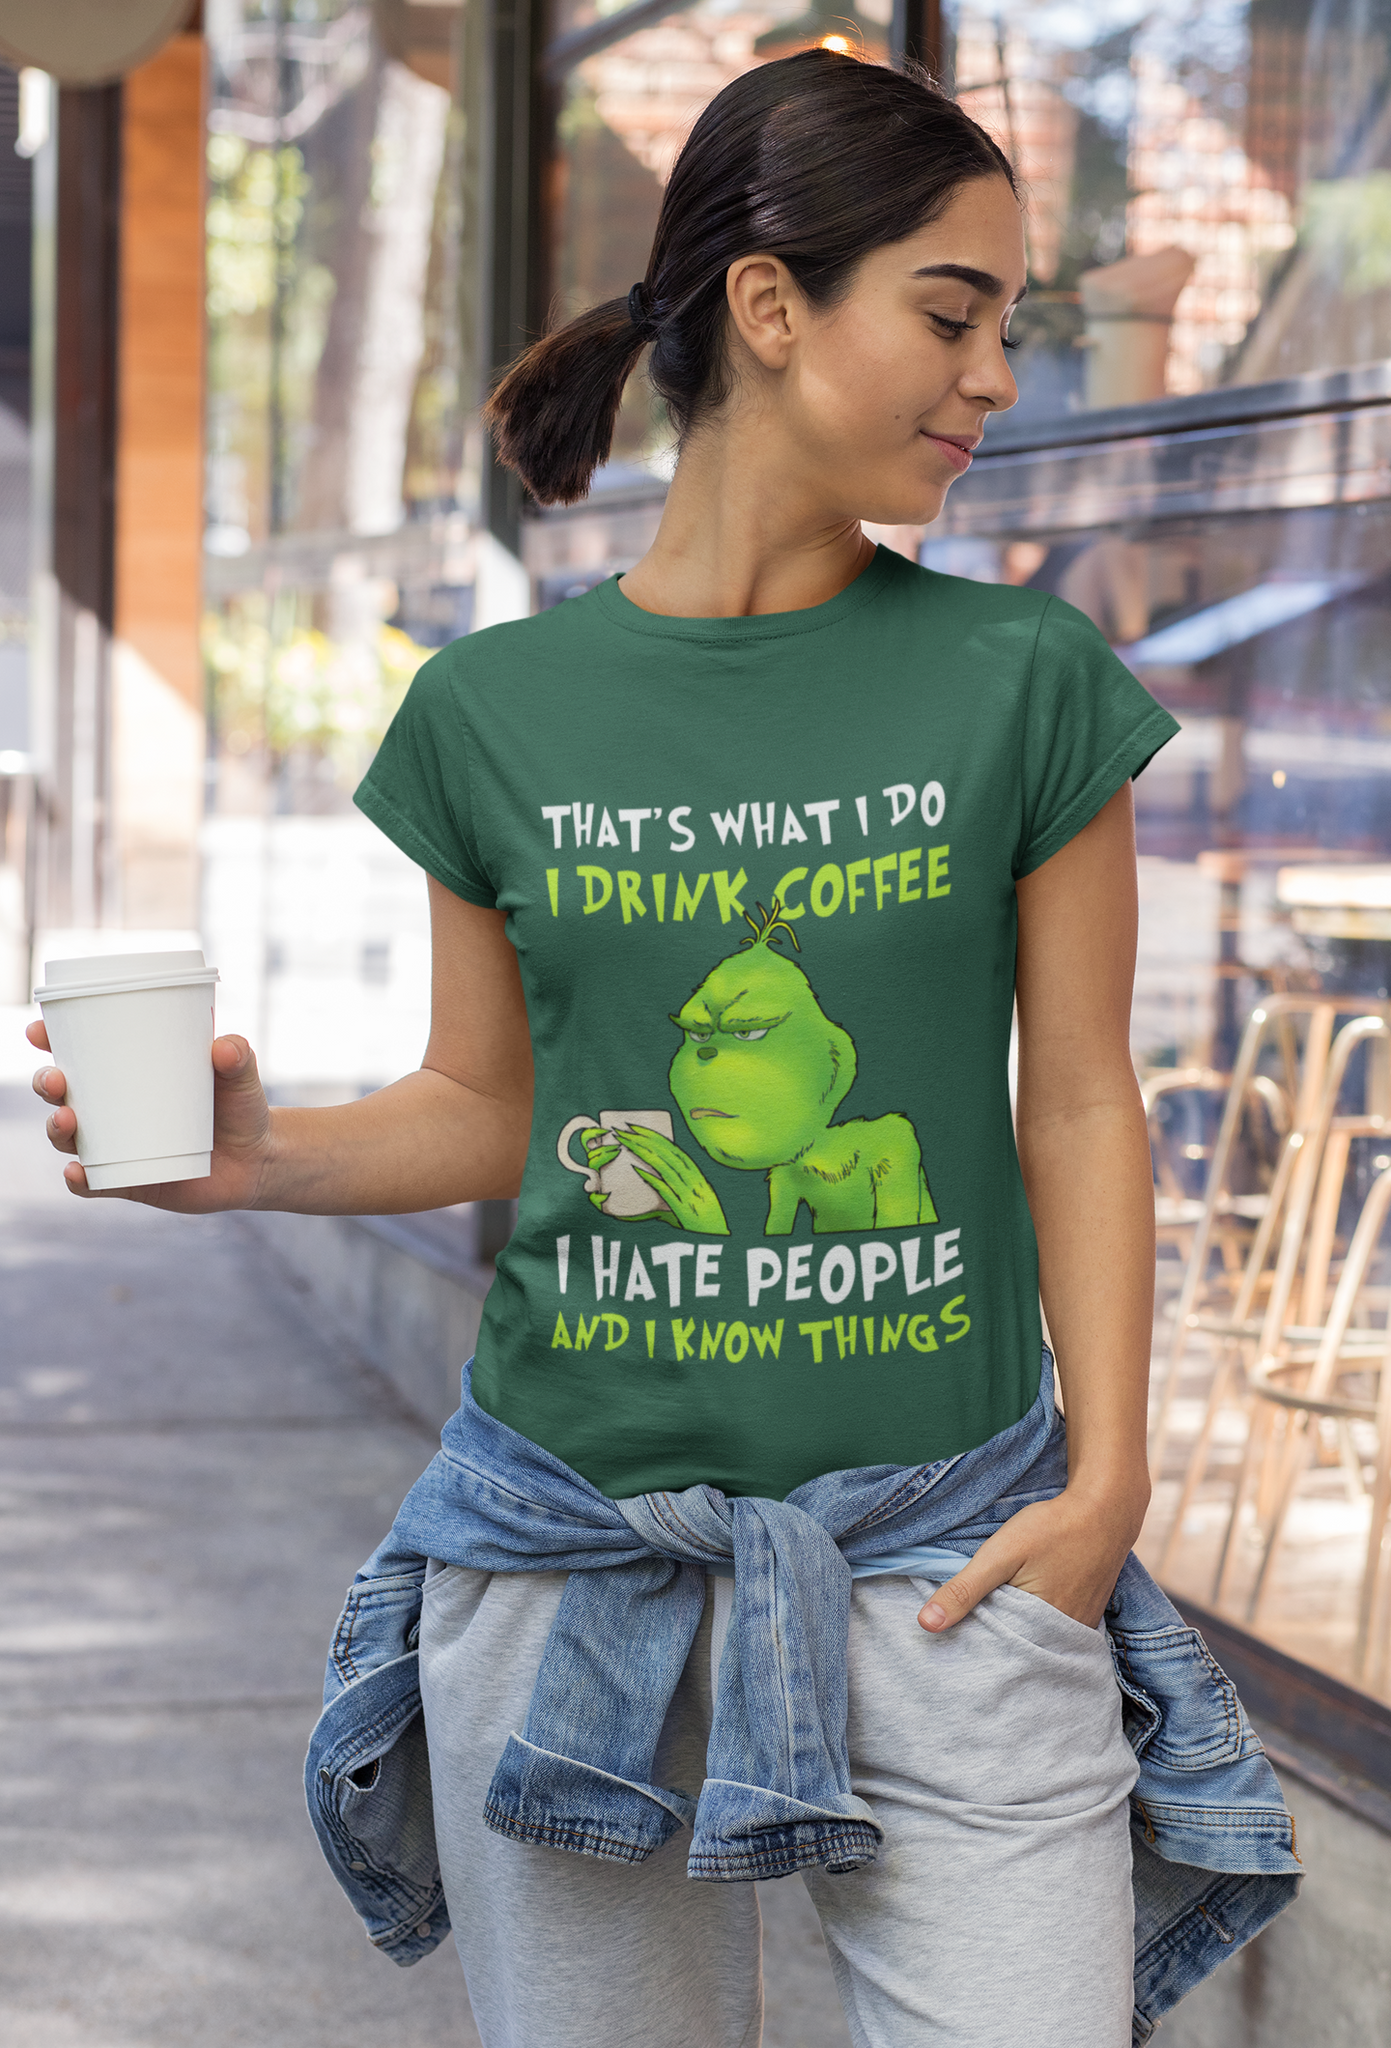 Grinch T Shirt, Thats What I Do I Drink Coffee Tshirt, I Hate People And I Know Things Shirt, Christmas Movie Shirt, Christmas Gifts